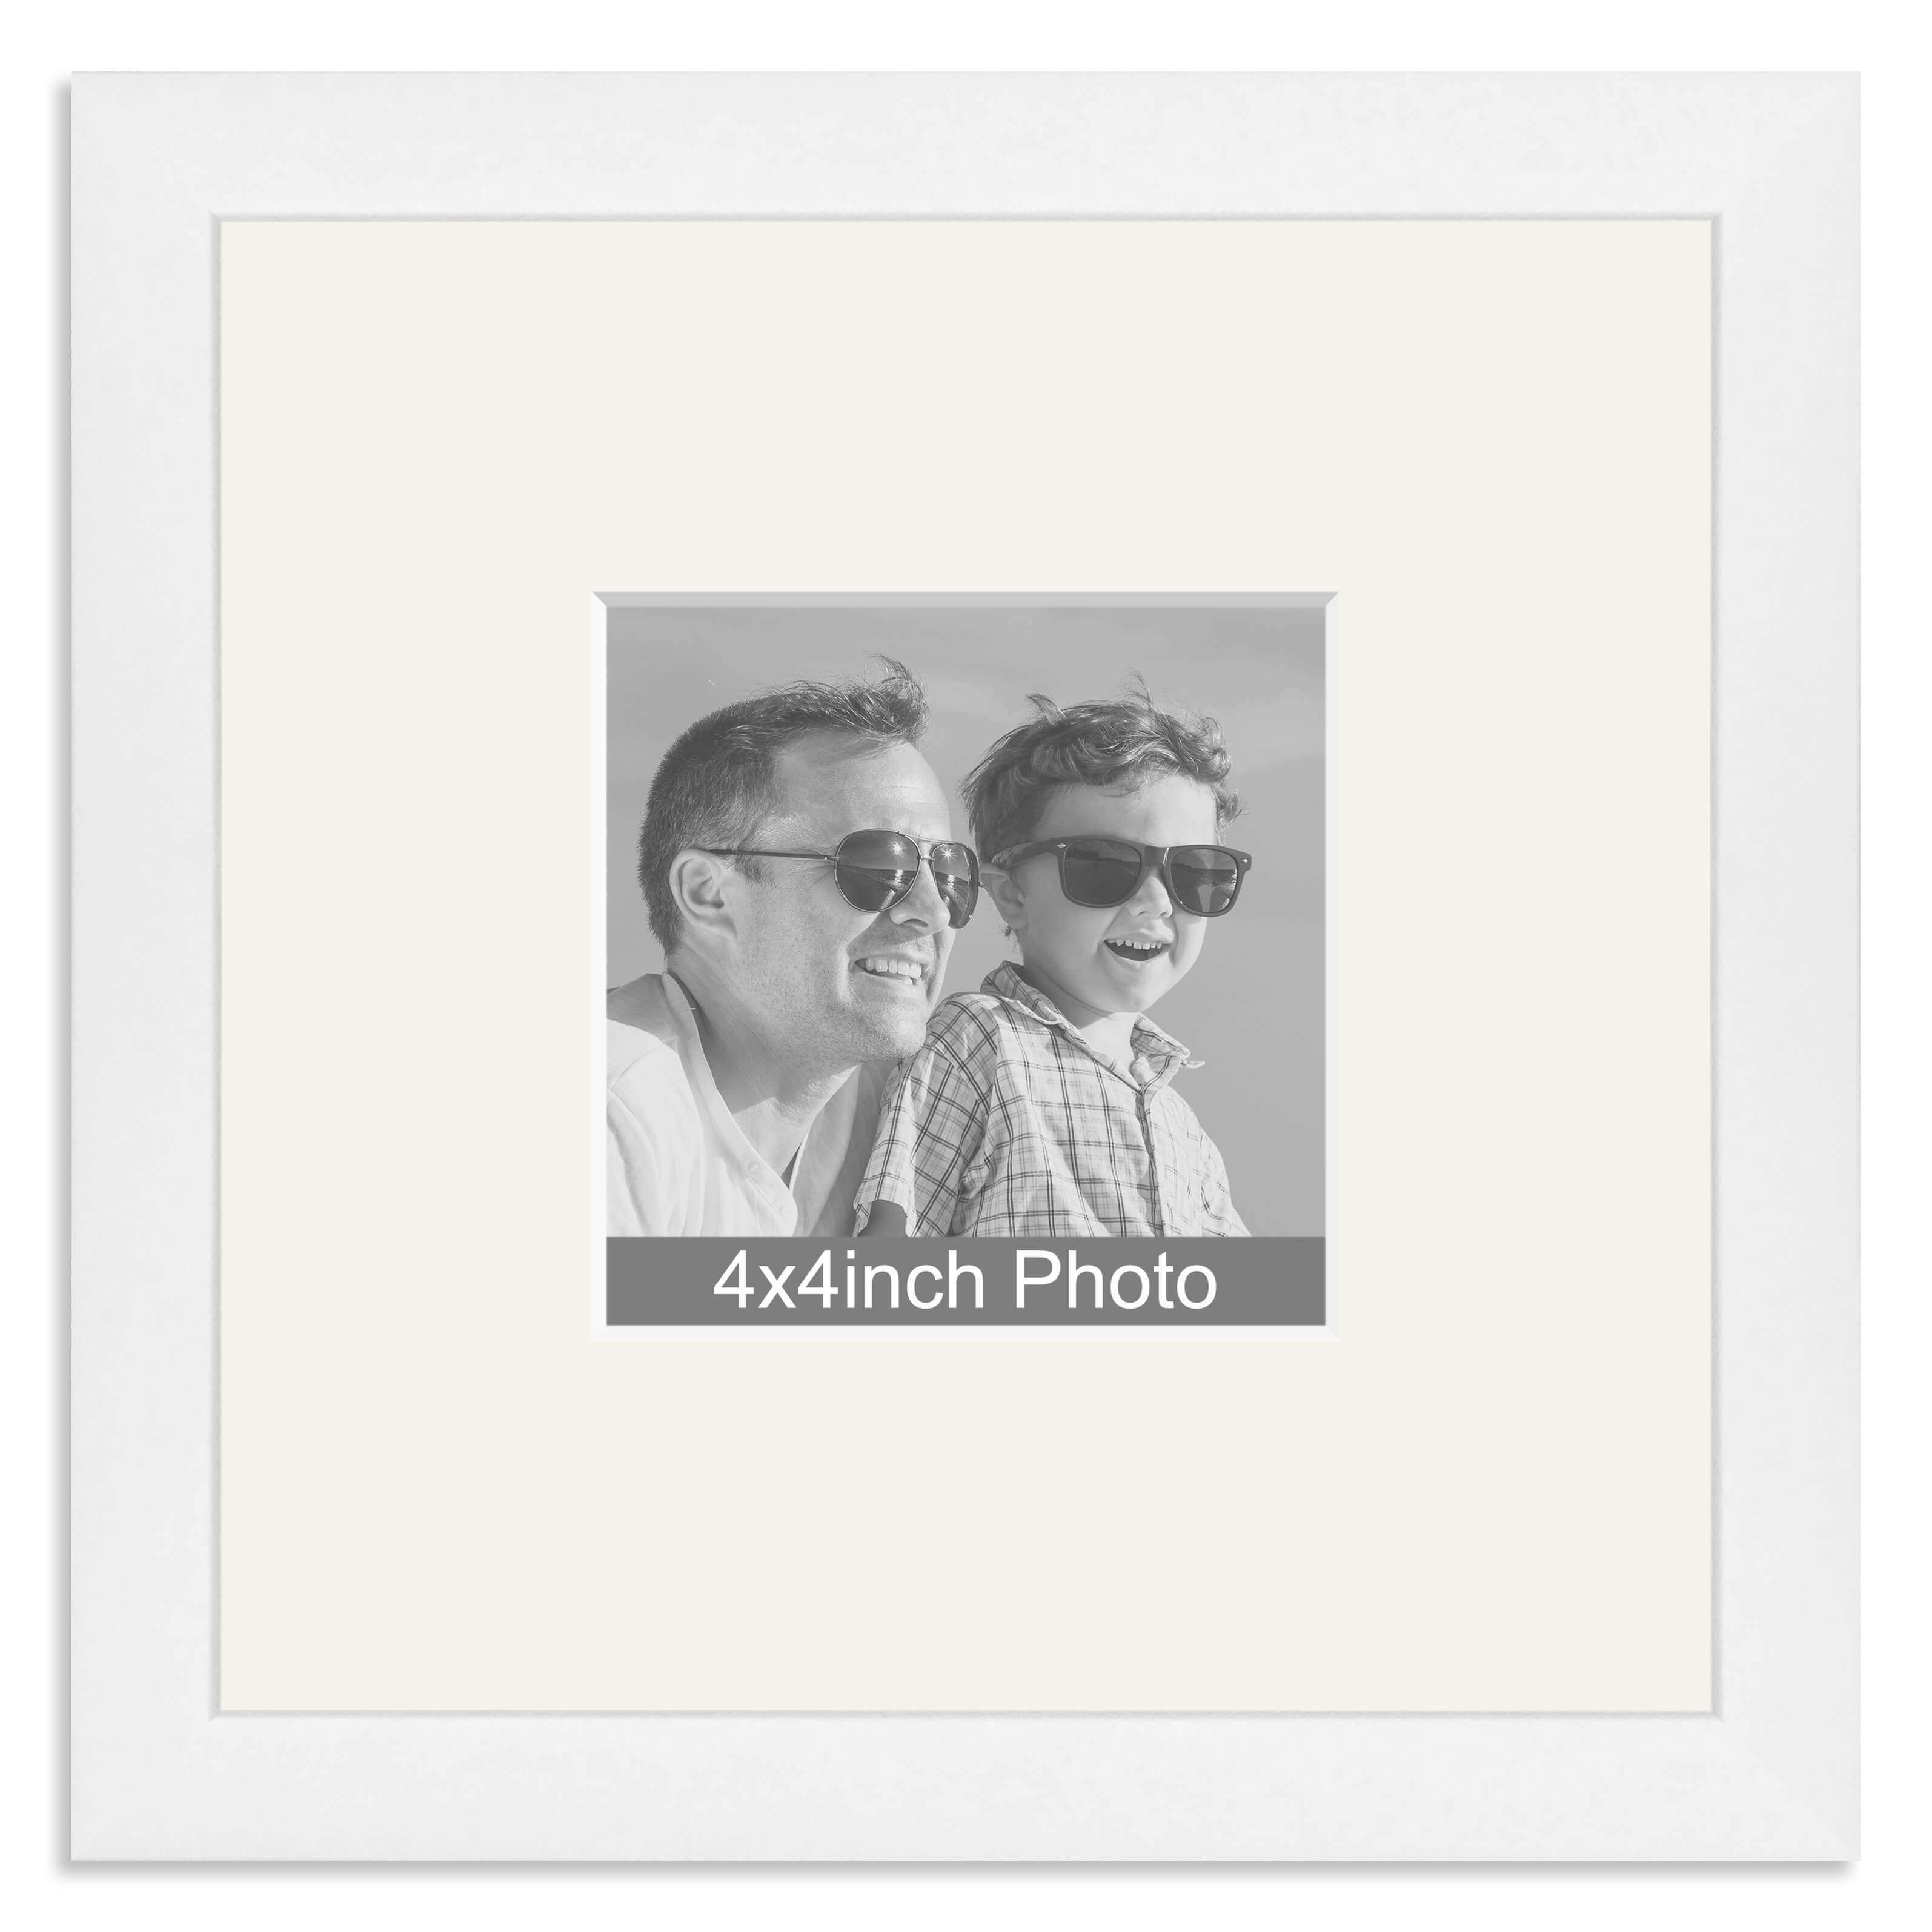 White Wooden Instagram Photo Frame with mount for a 4x4in Photo